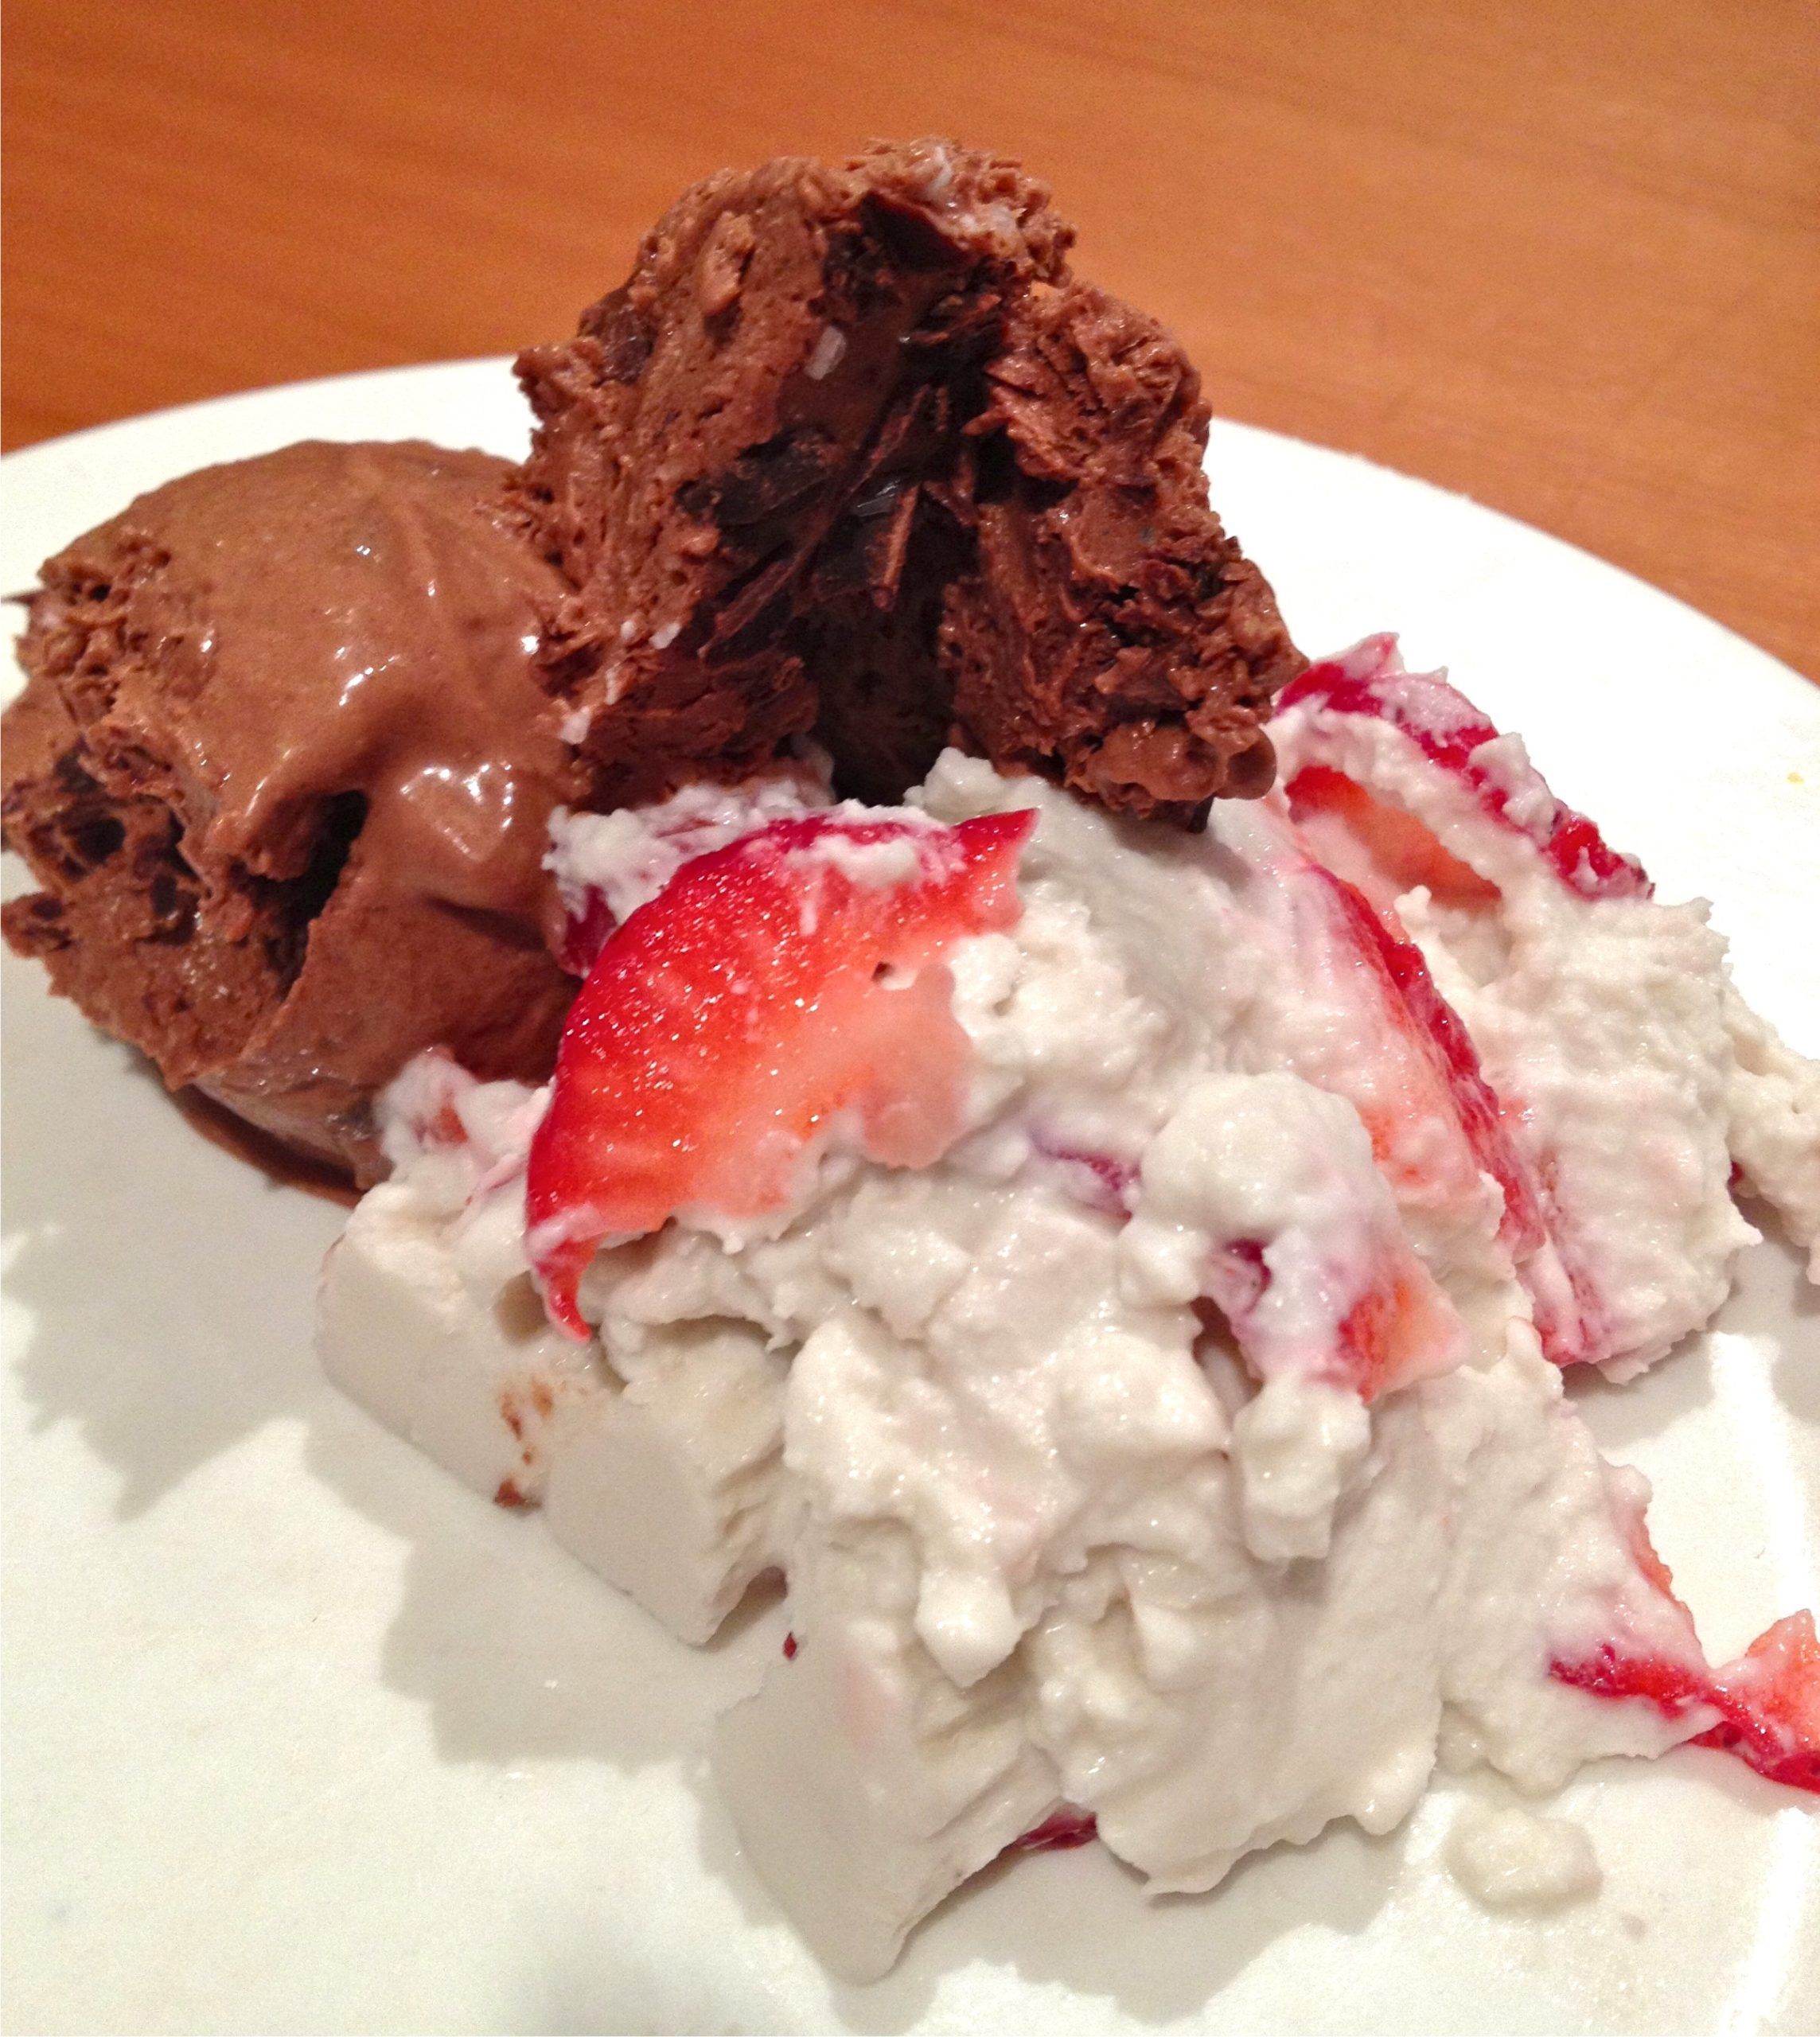 Best Weight Loss Food: Dairy Free No Added Sugar Strawberry and Coconut Ice Cream